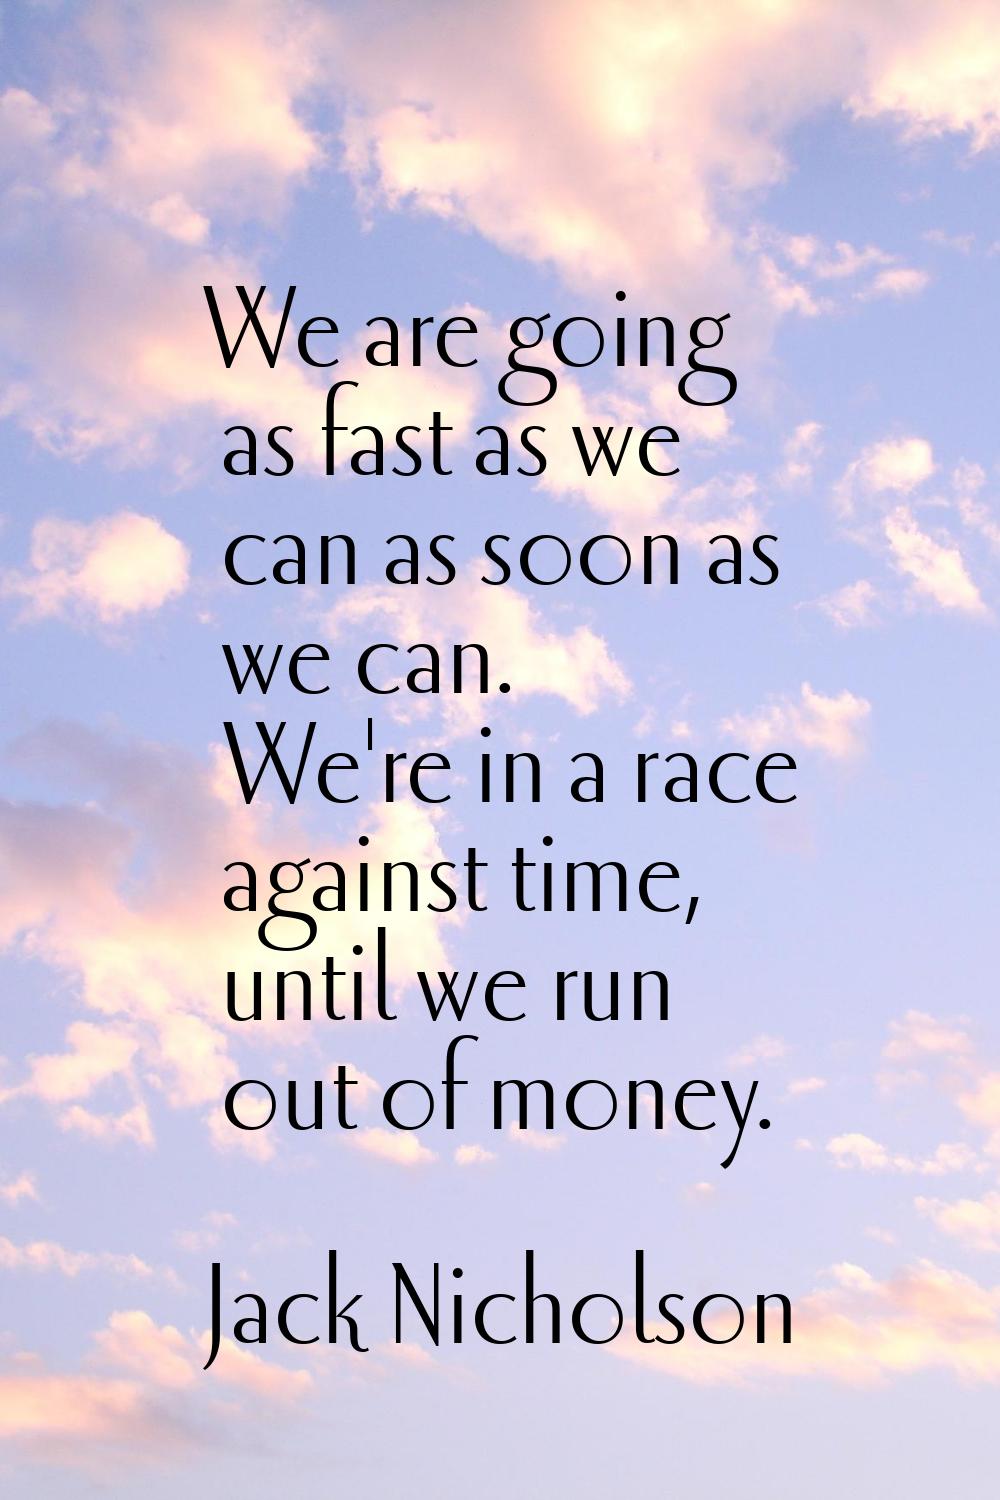 We are going as fast as we can as soon as we can. We're in a race against time, until we run out of